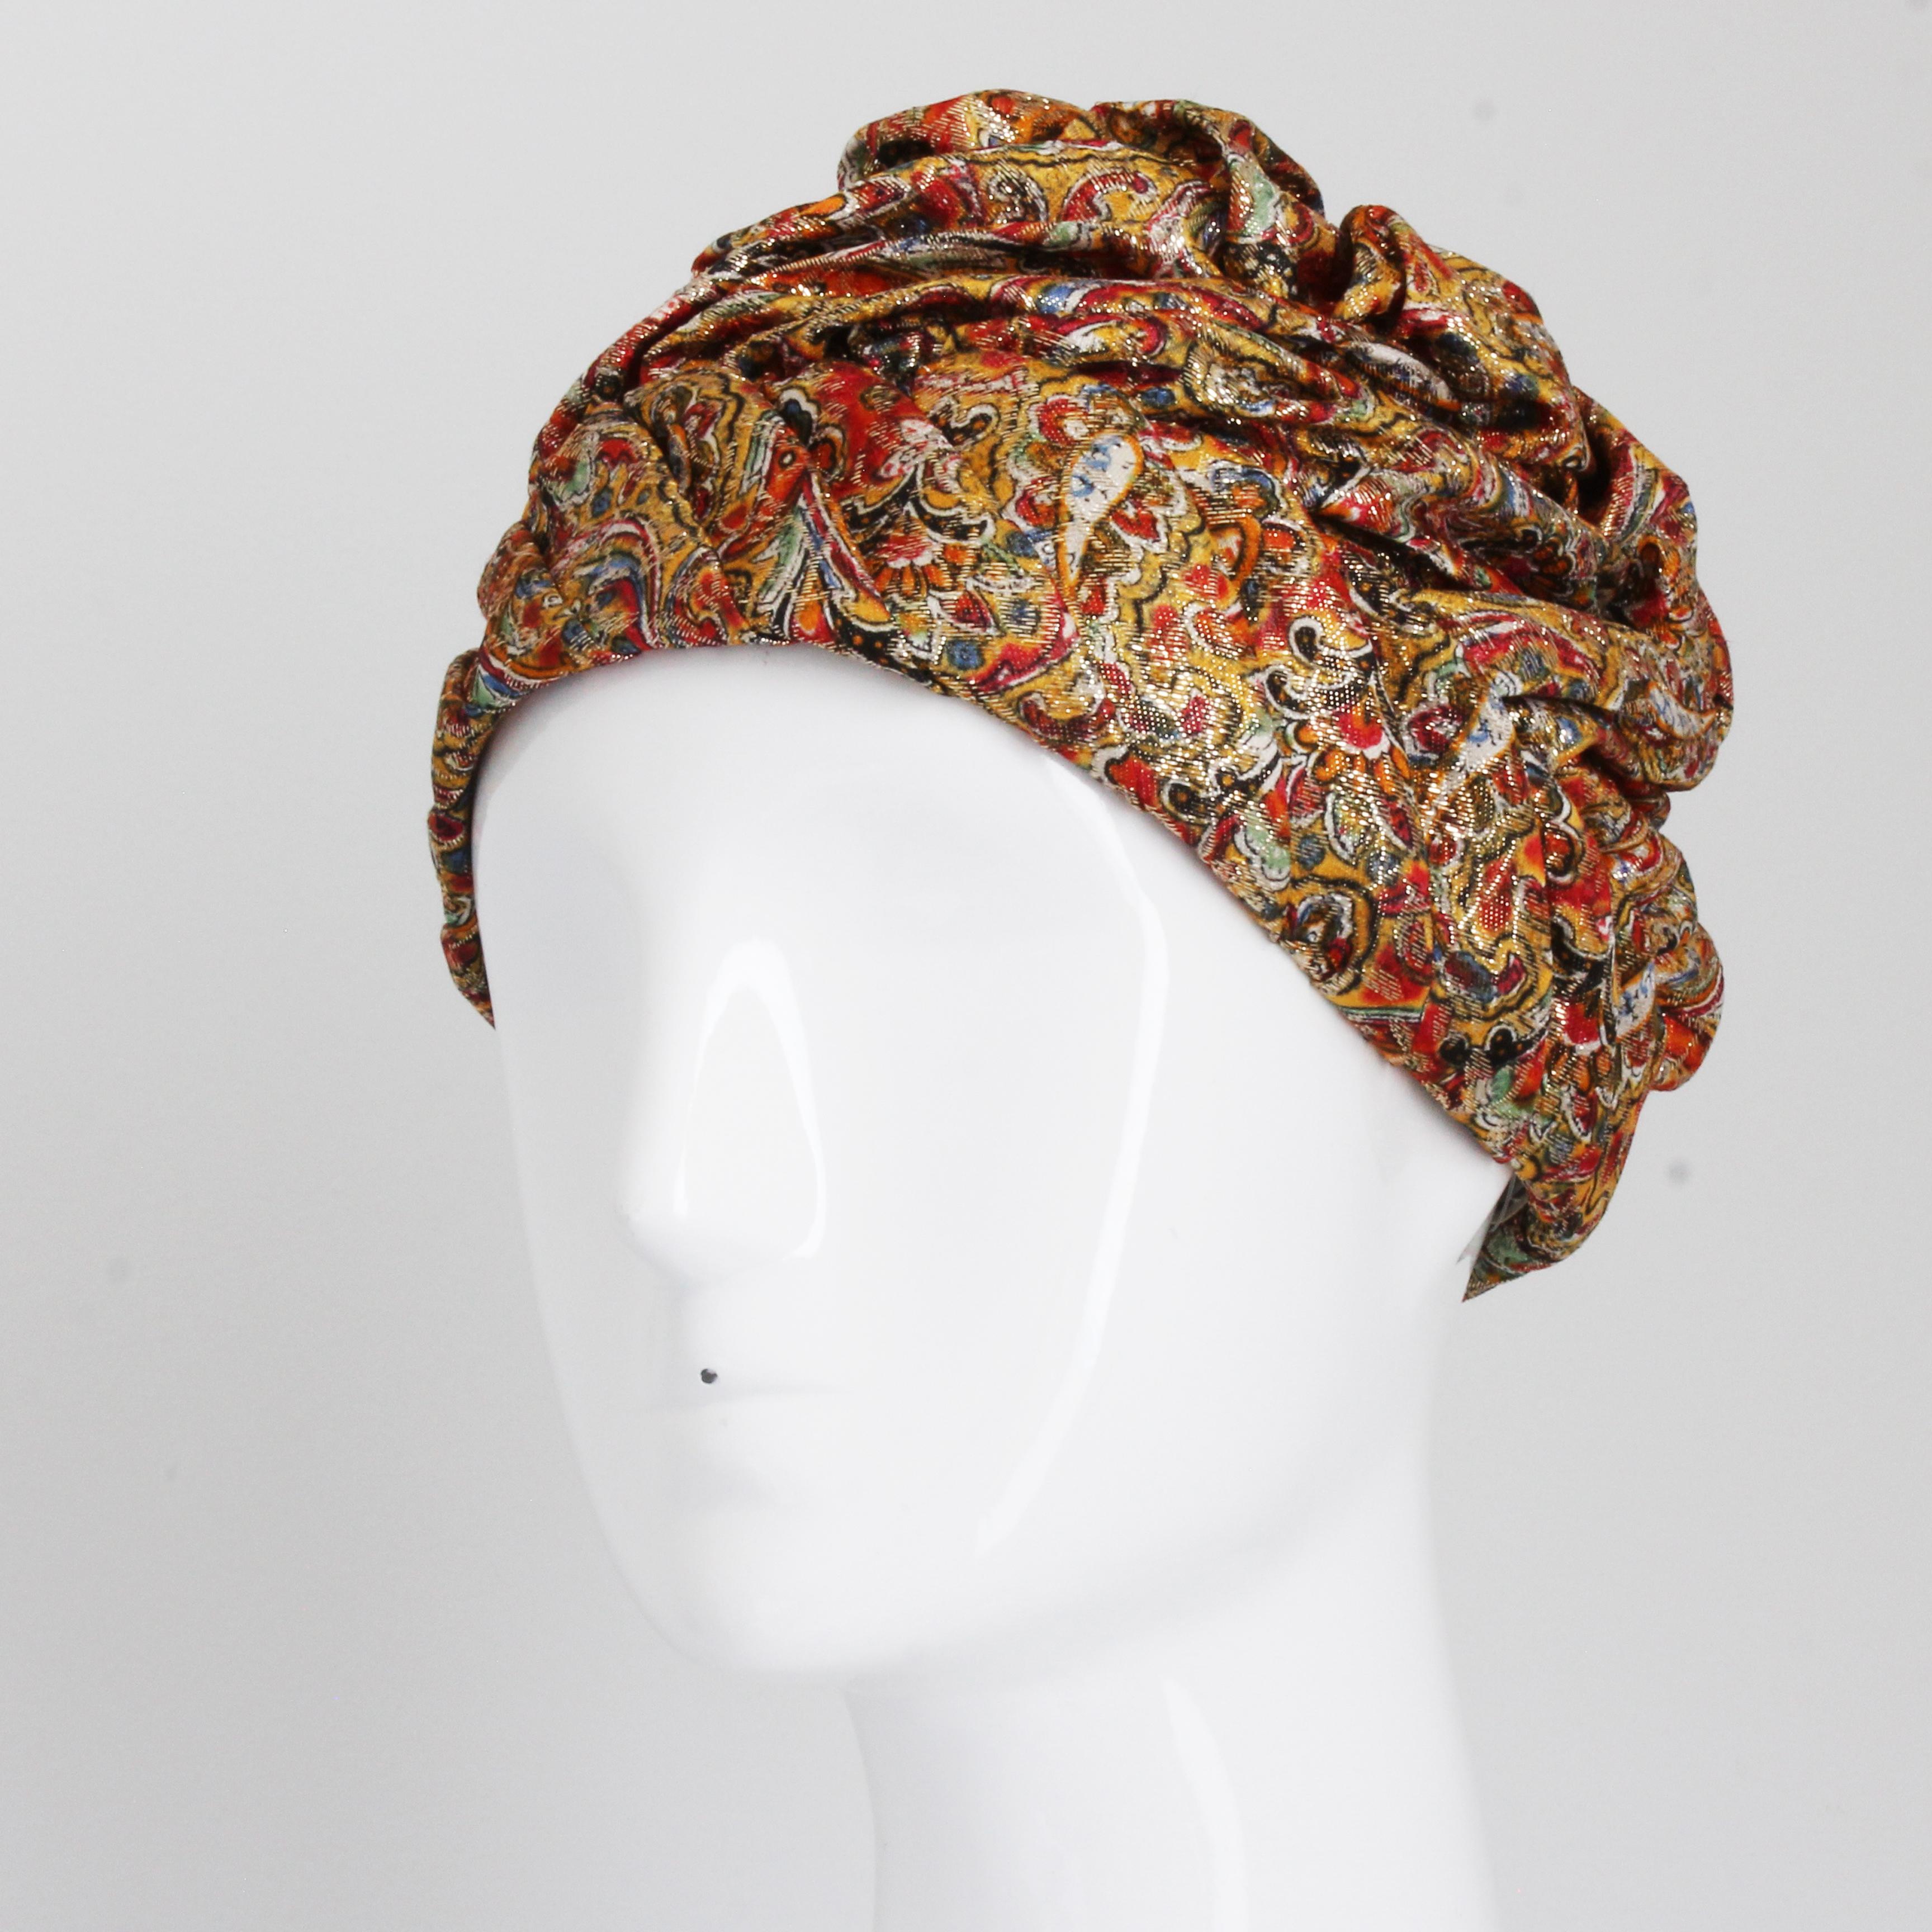 1950s Turban Hat Metallic Paisley Colorful by Marshall Field & Company Rare  In Good Condition For Sale In Port Saint Lucie, FL